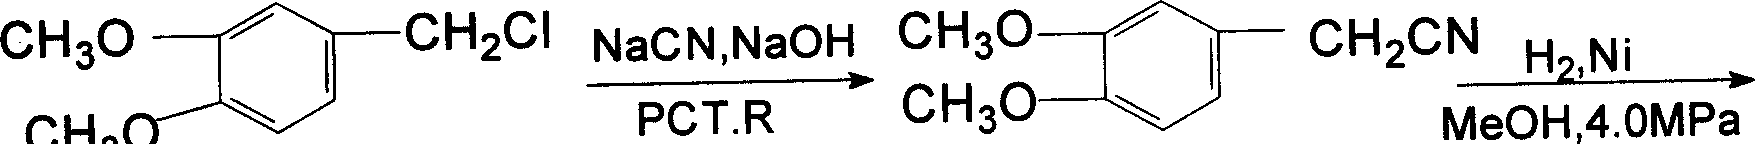 Synthesis process of palmatine and its salts